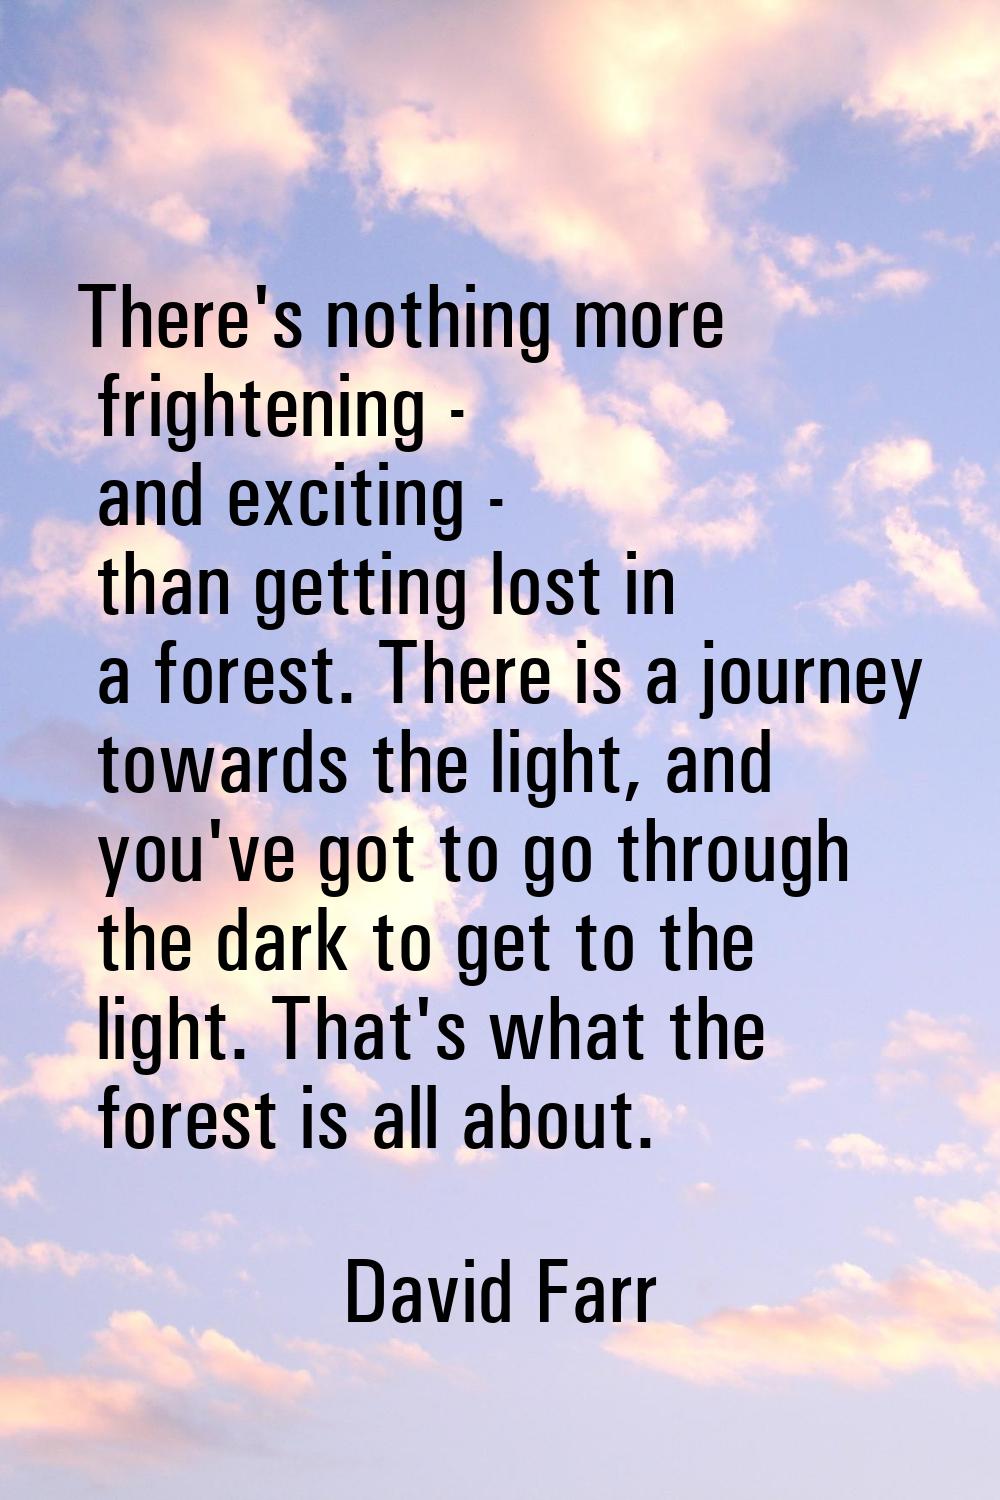 There's nothing more frightening - and exciting - than getting lost in a forest. There is a journey